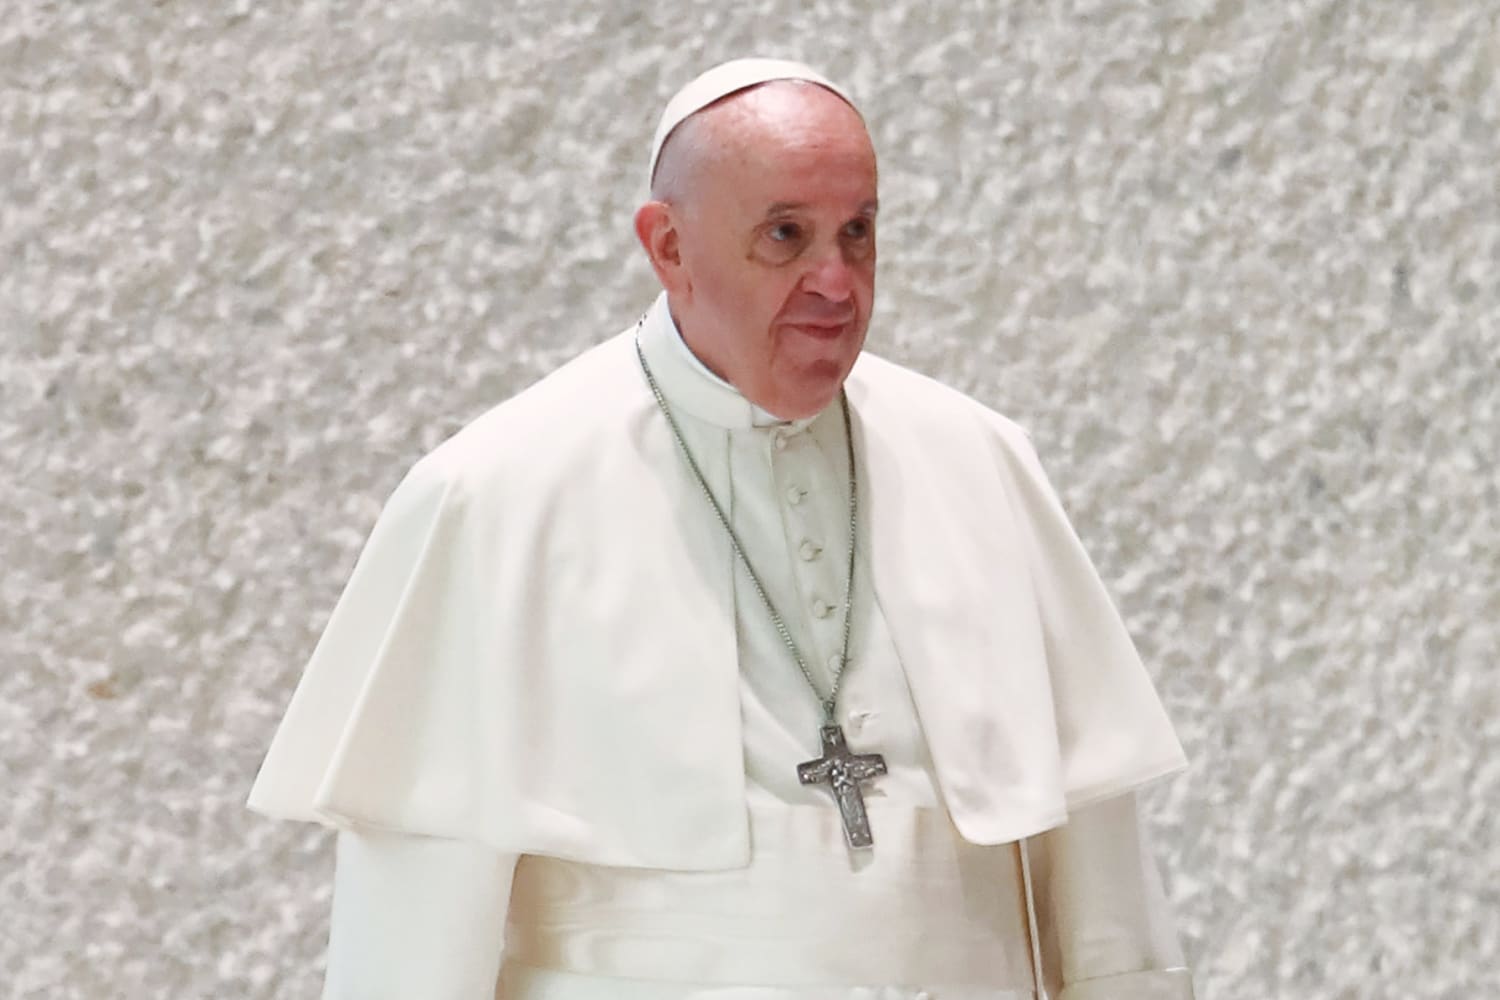 Pope Francis rebukes couples who have pets instead of children. That’s rich.